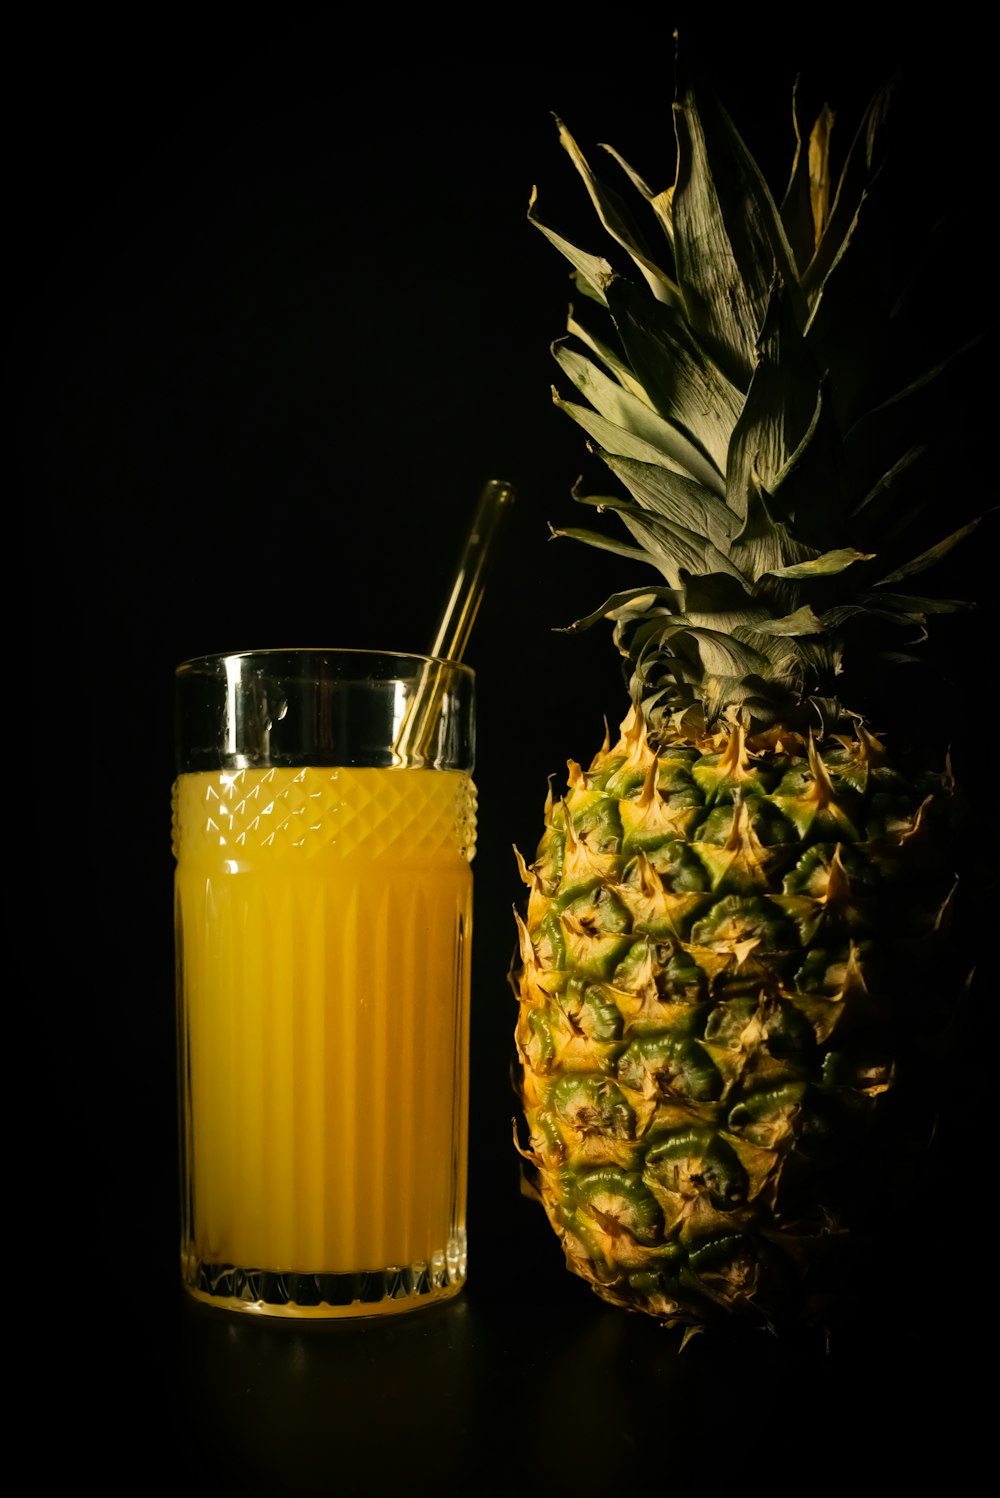 a glass of orange juice next to a pineapple